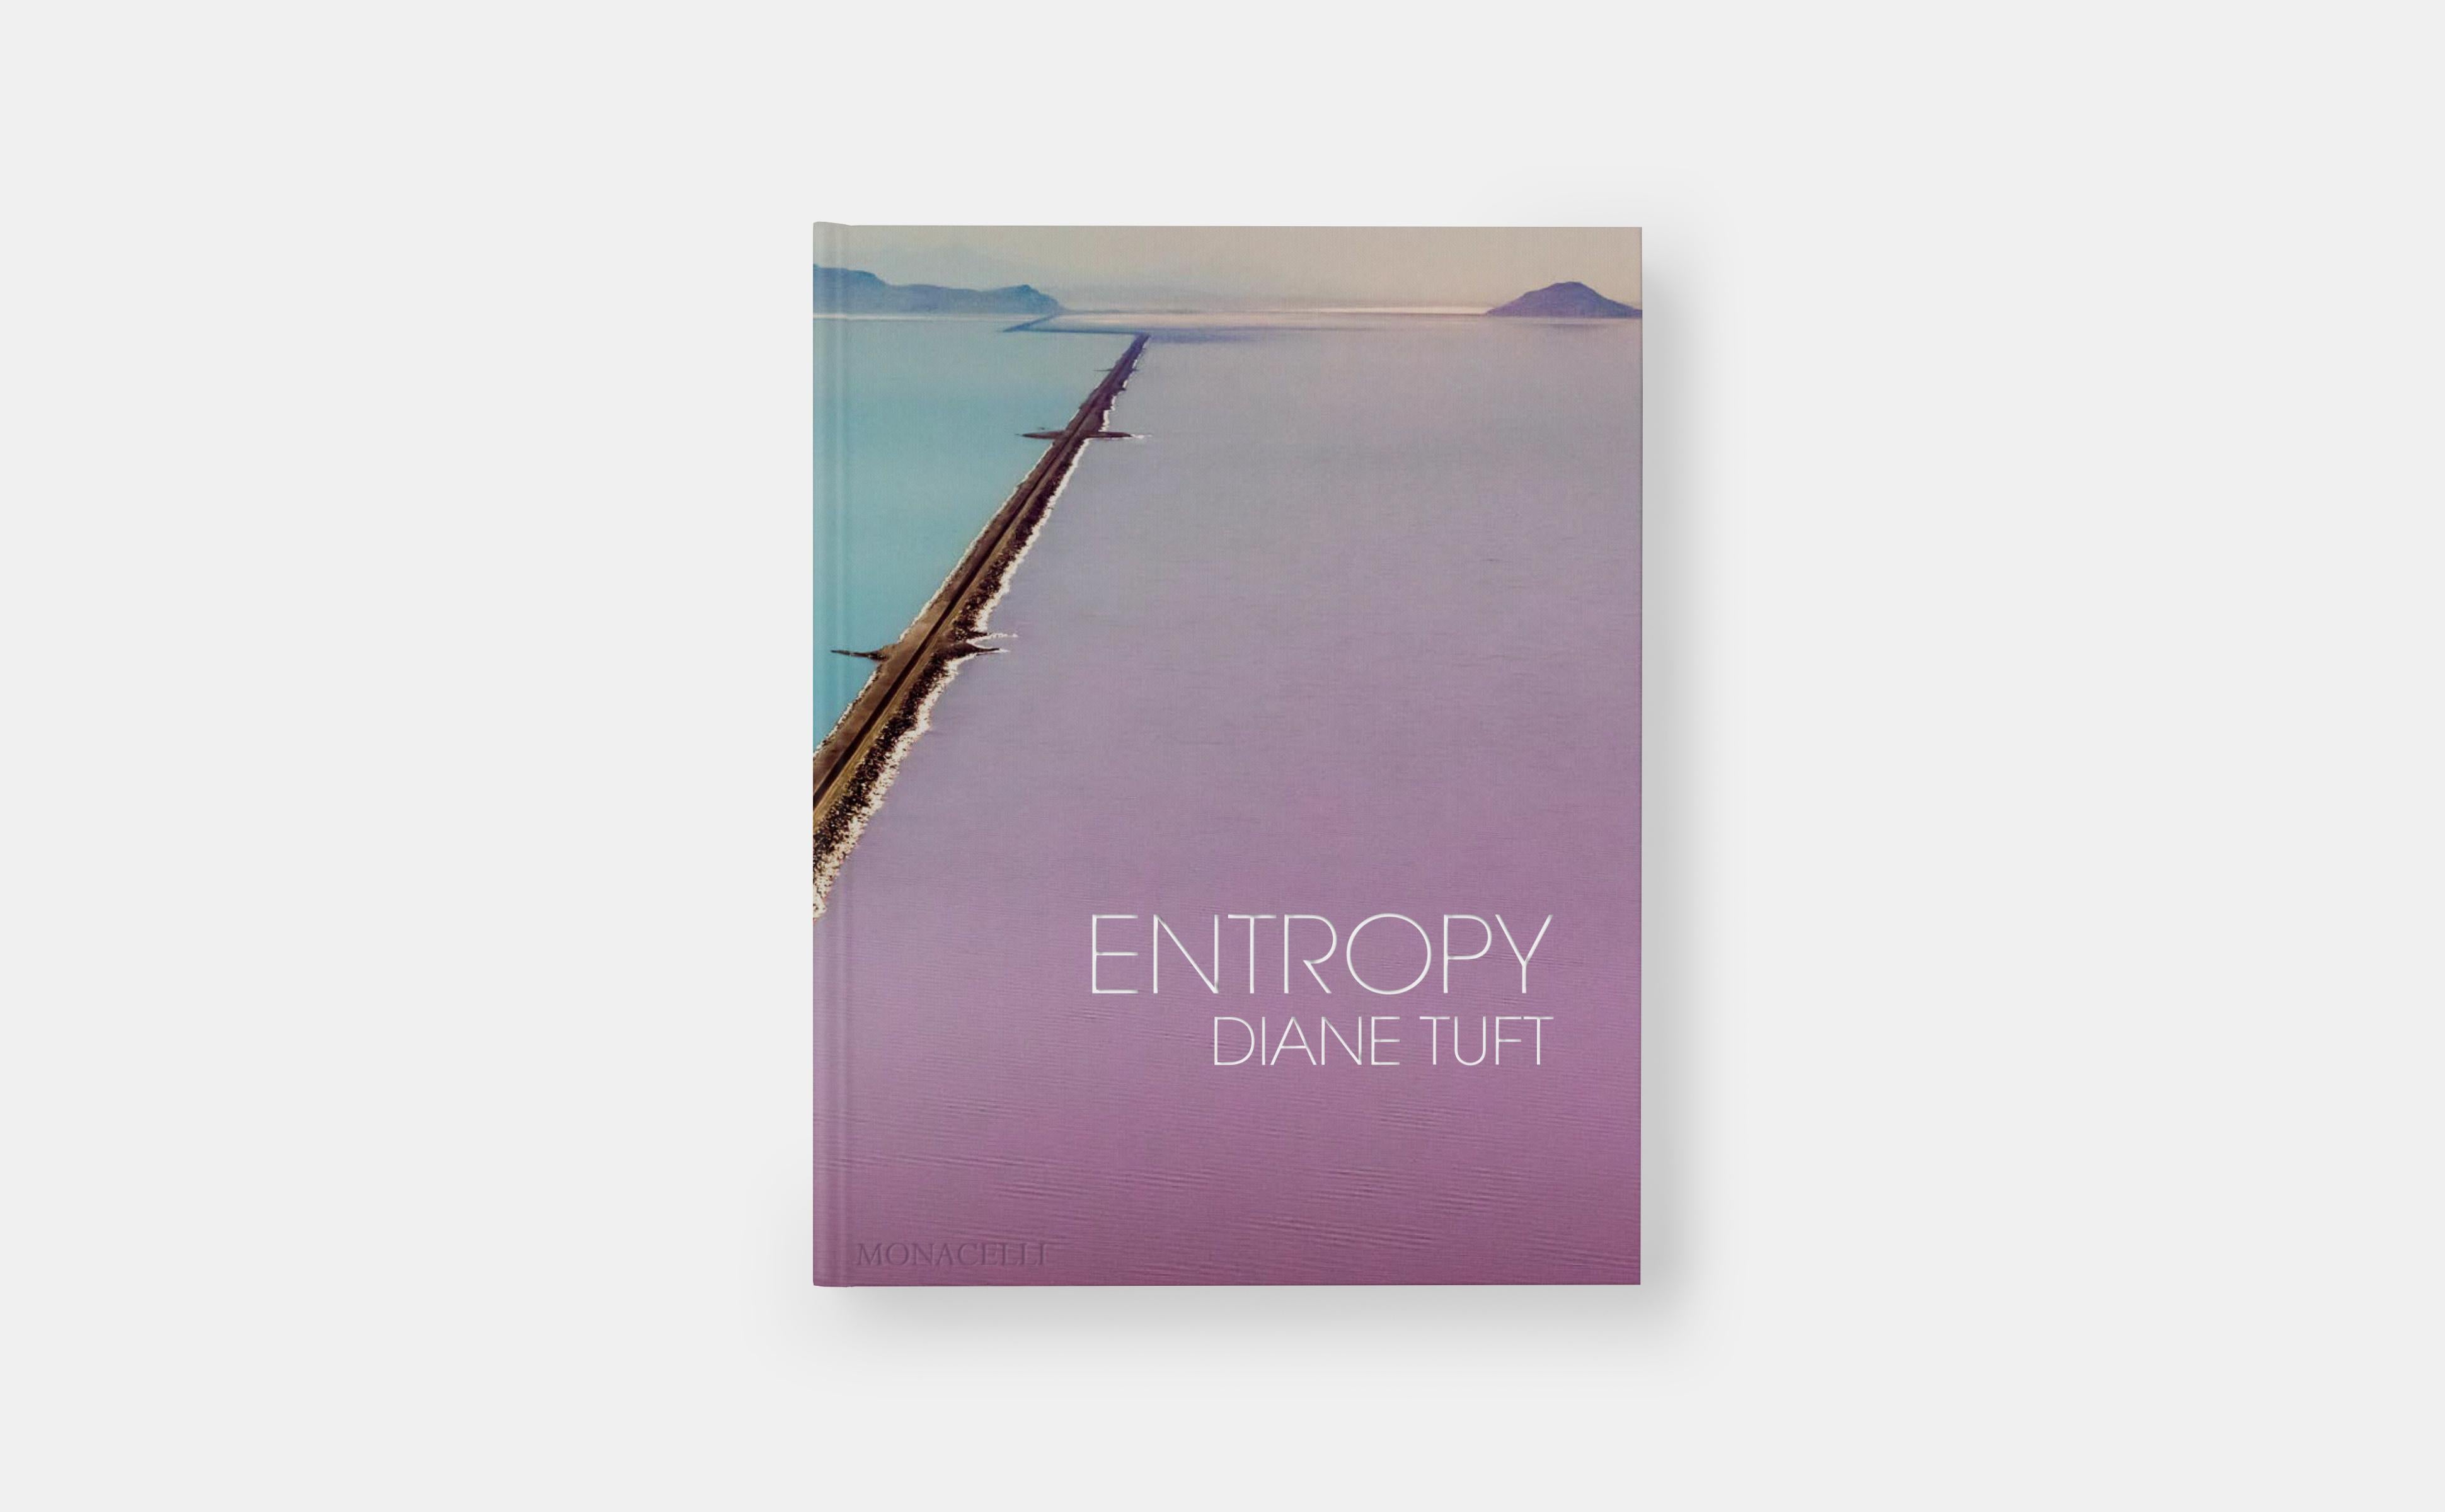 A photographic exploration detailing the poetry and fragility of nature amidst the tragedy of climate change

Since 1998, mixed-media artist Diane Tuft has traveled the world recording the environmental factors shaping Earth’s landscape. Entropy is